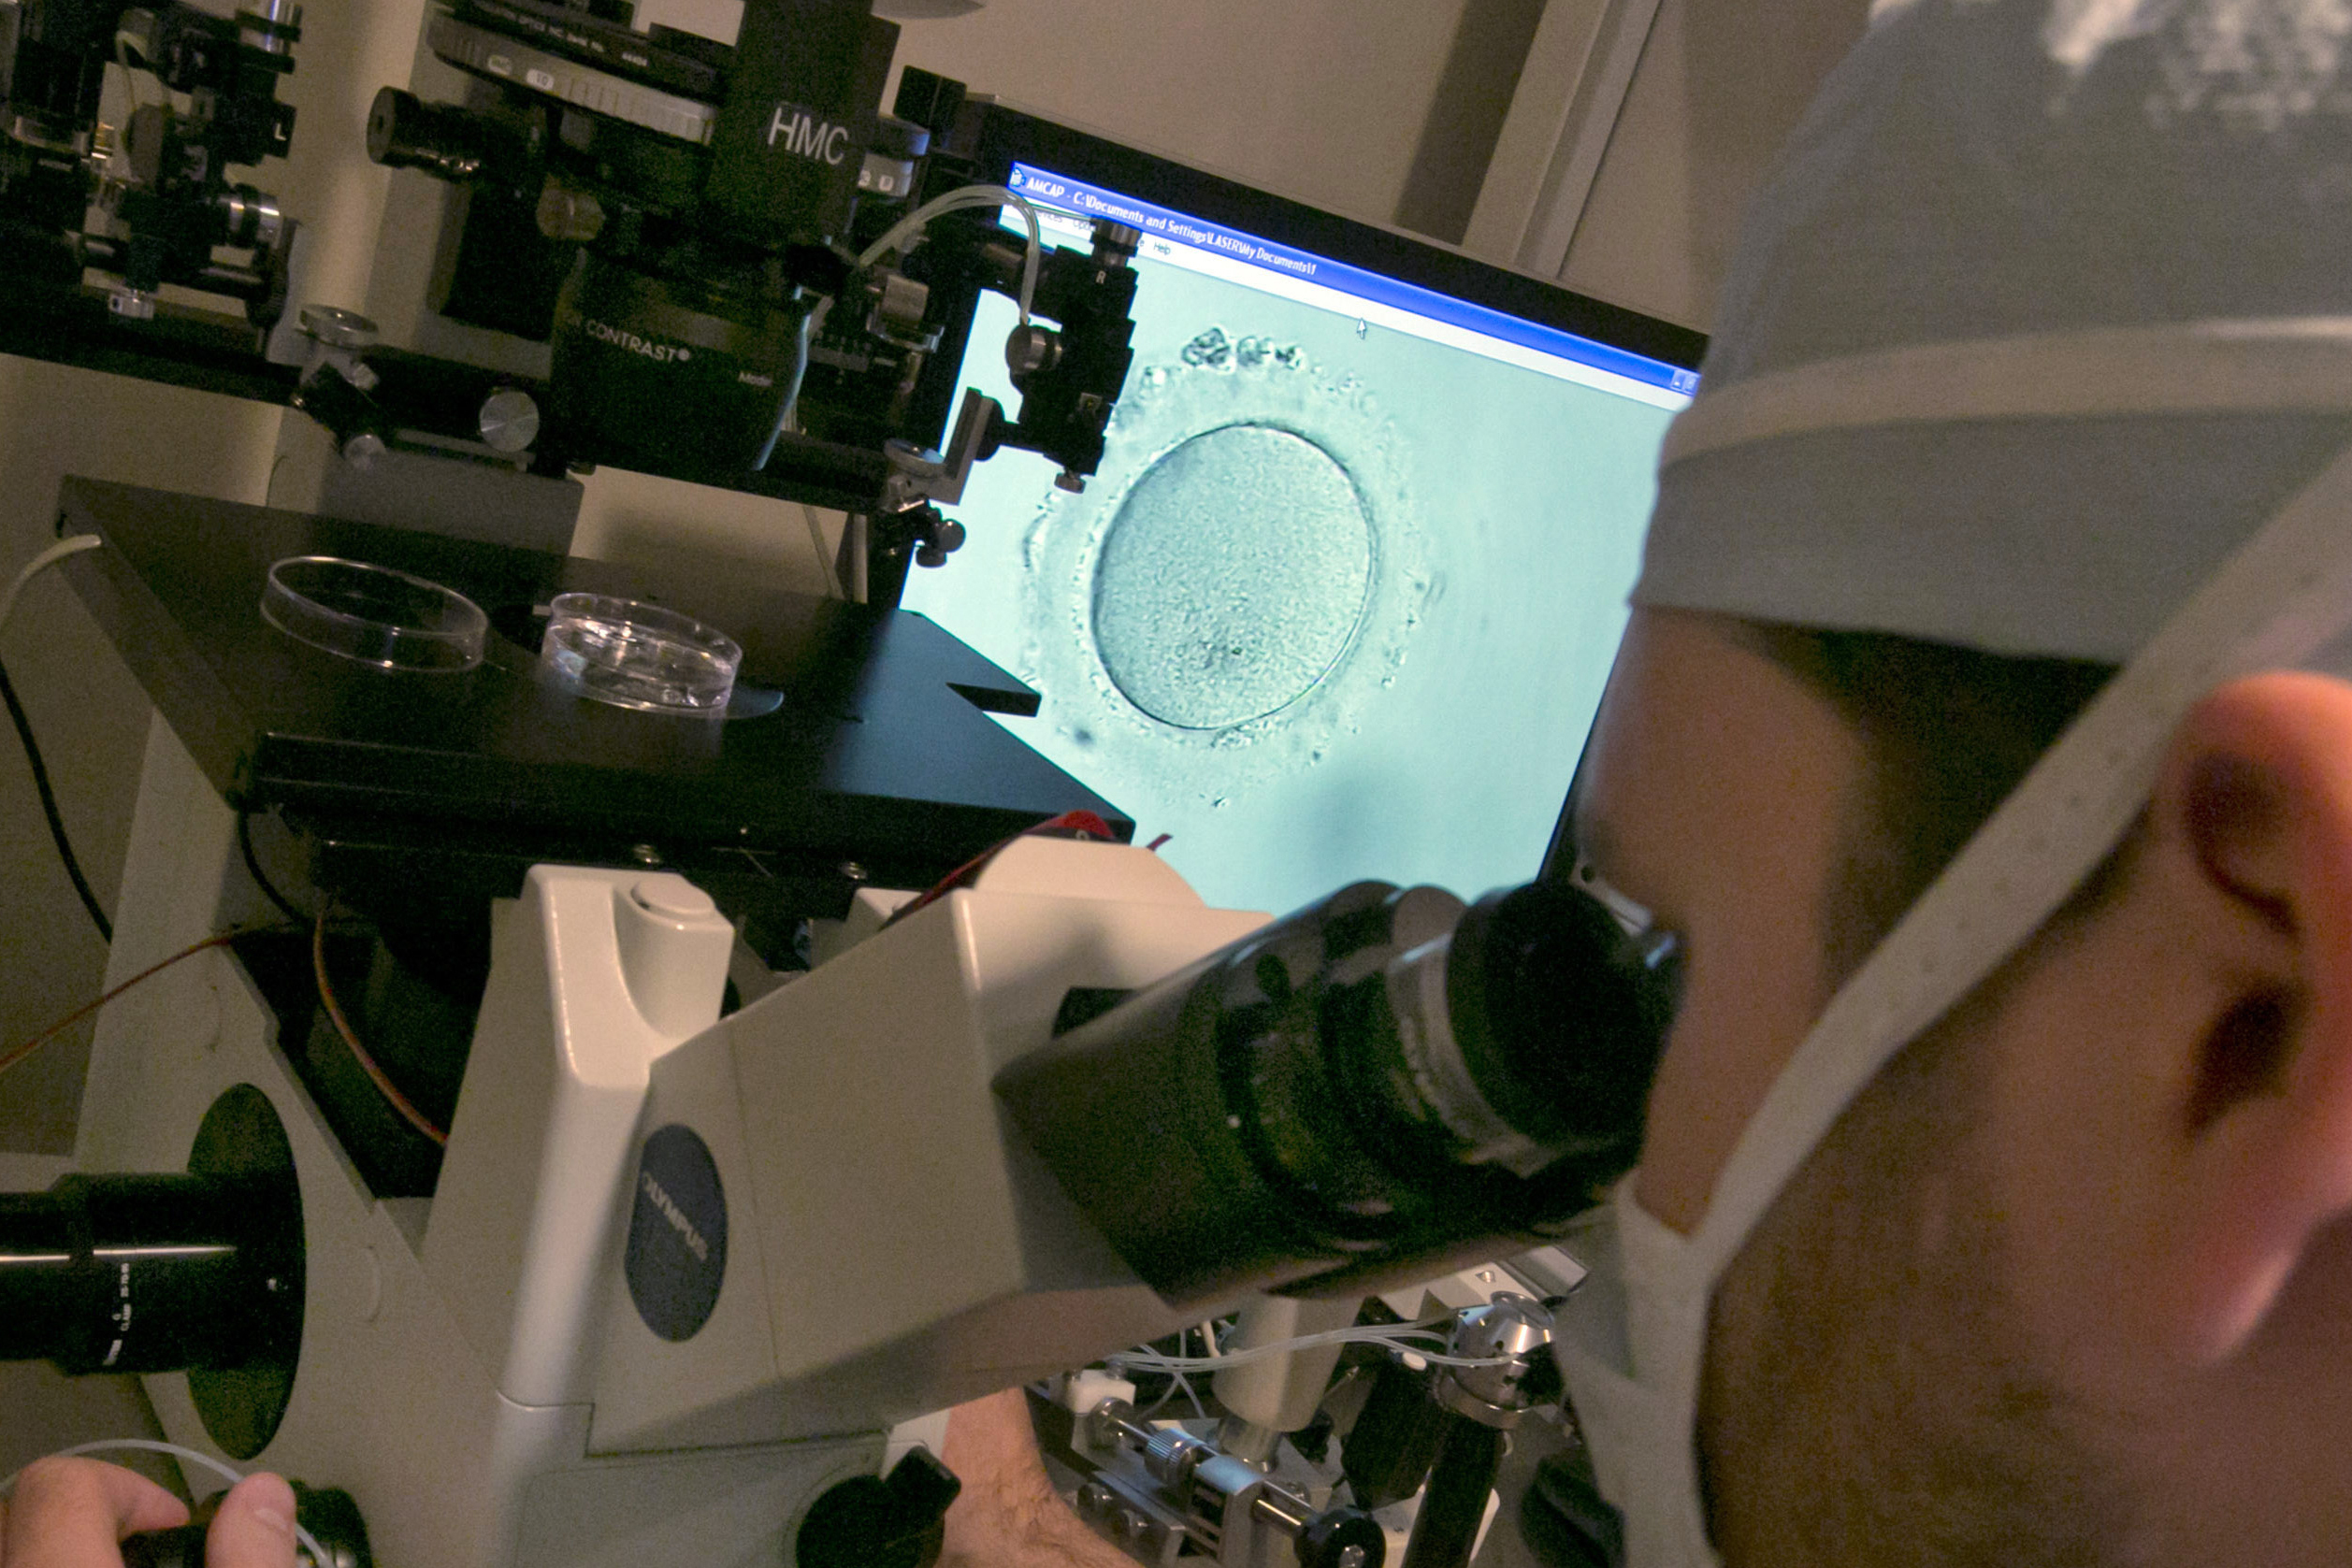 An embryologist uses a microscope to examine an embryo.